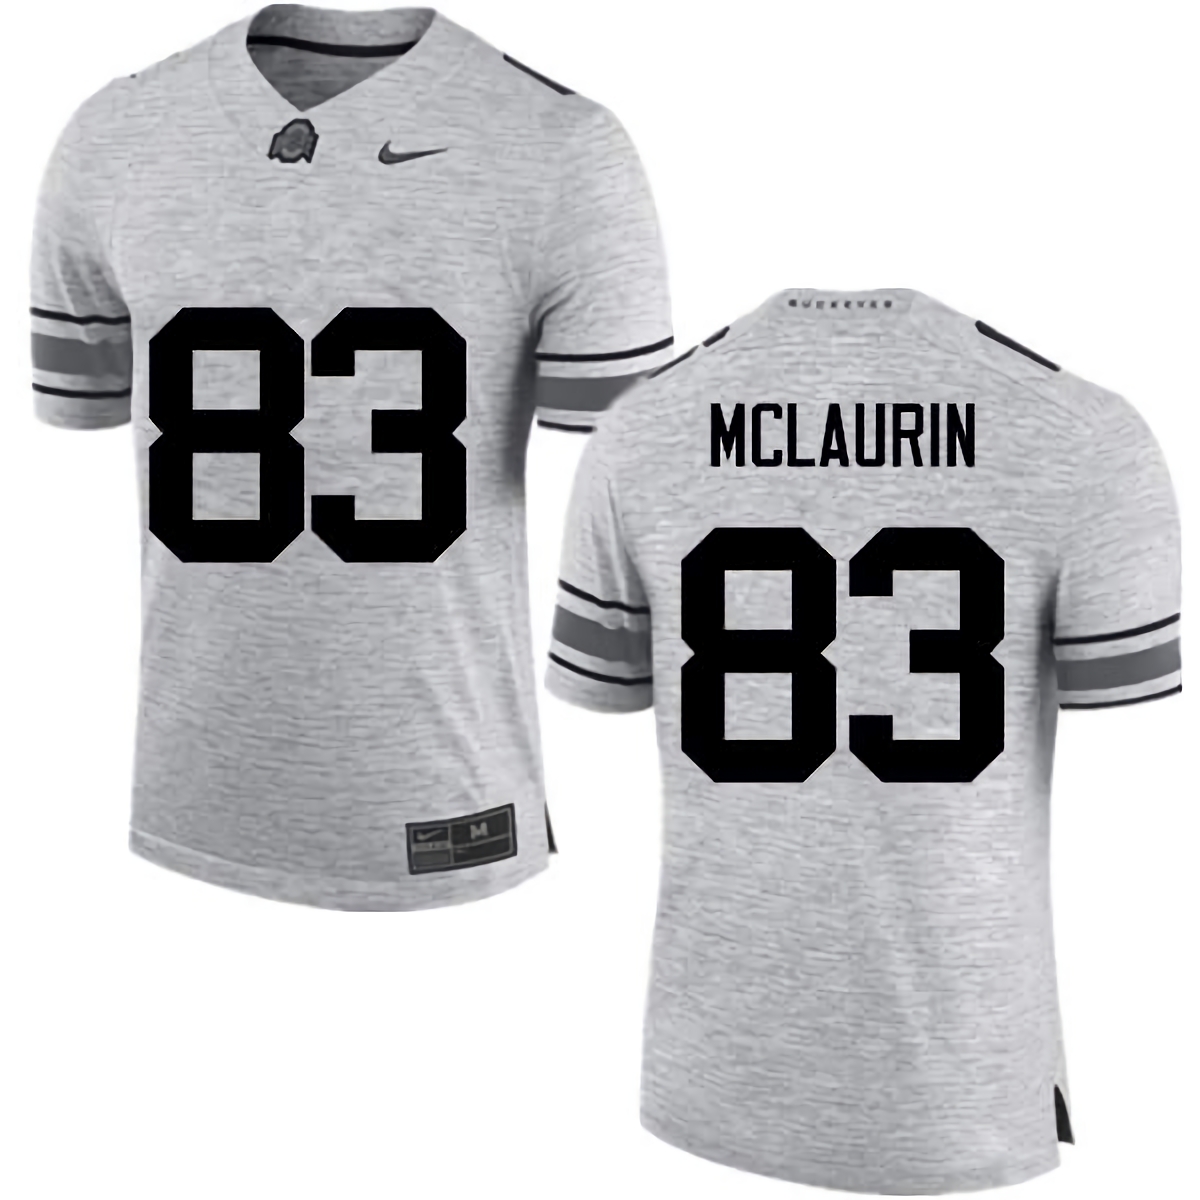 Terry McLaurin Ohio State Buckeyes Men's NCAA #83 Nike Gray College Stitched Football Jersey MAA2056HI